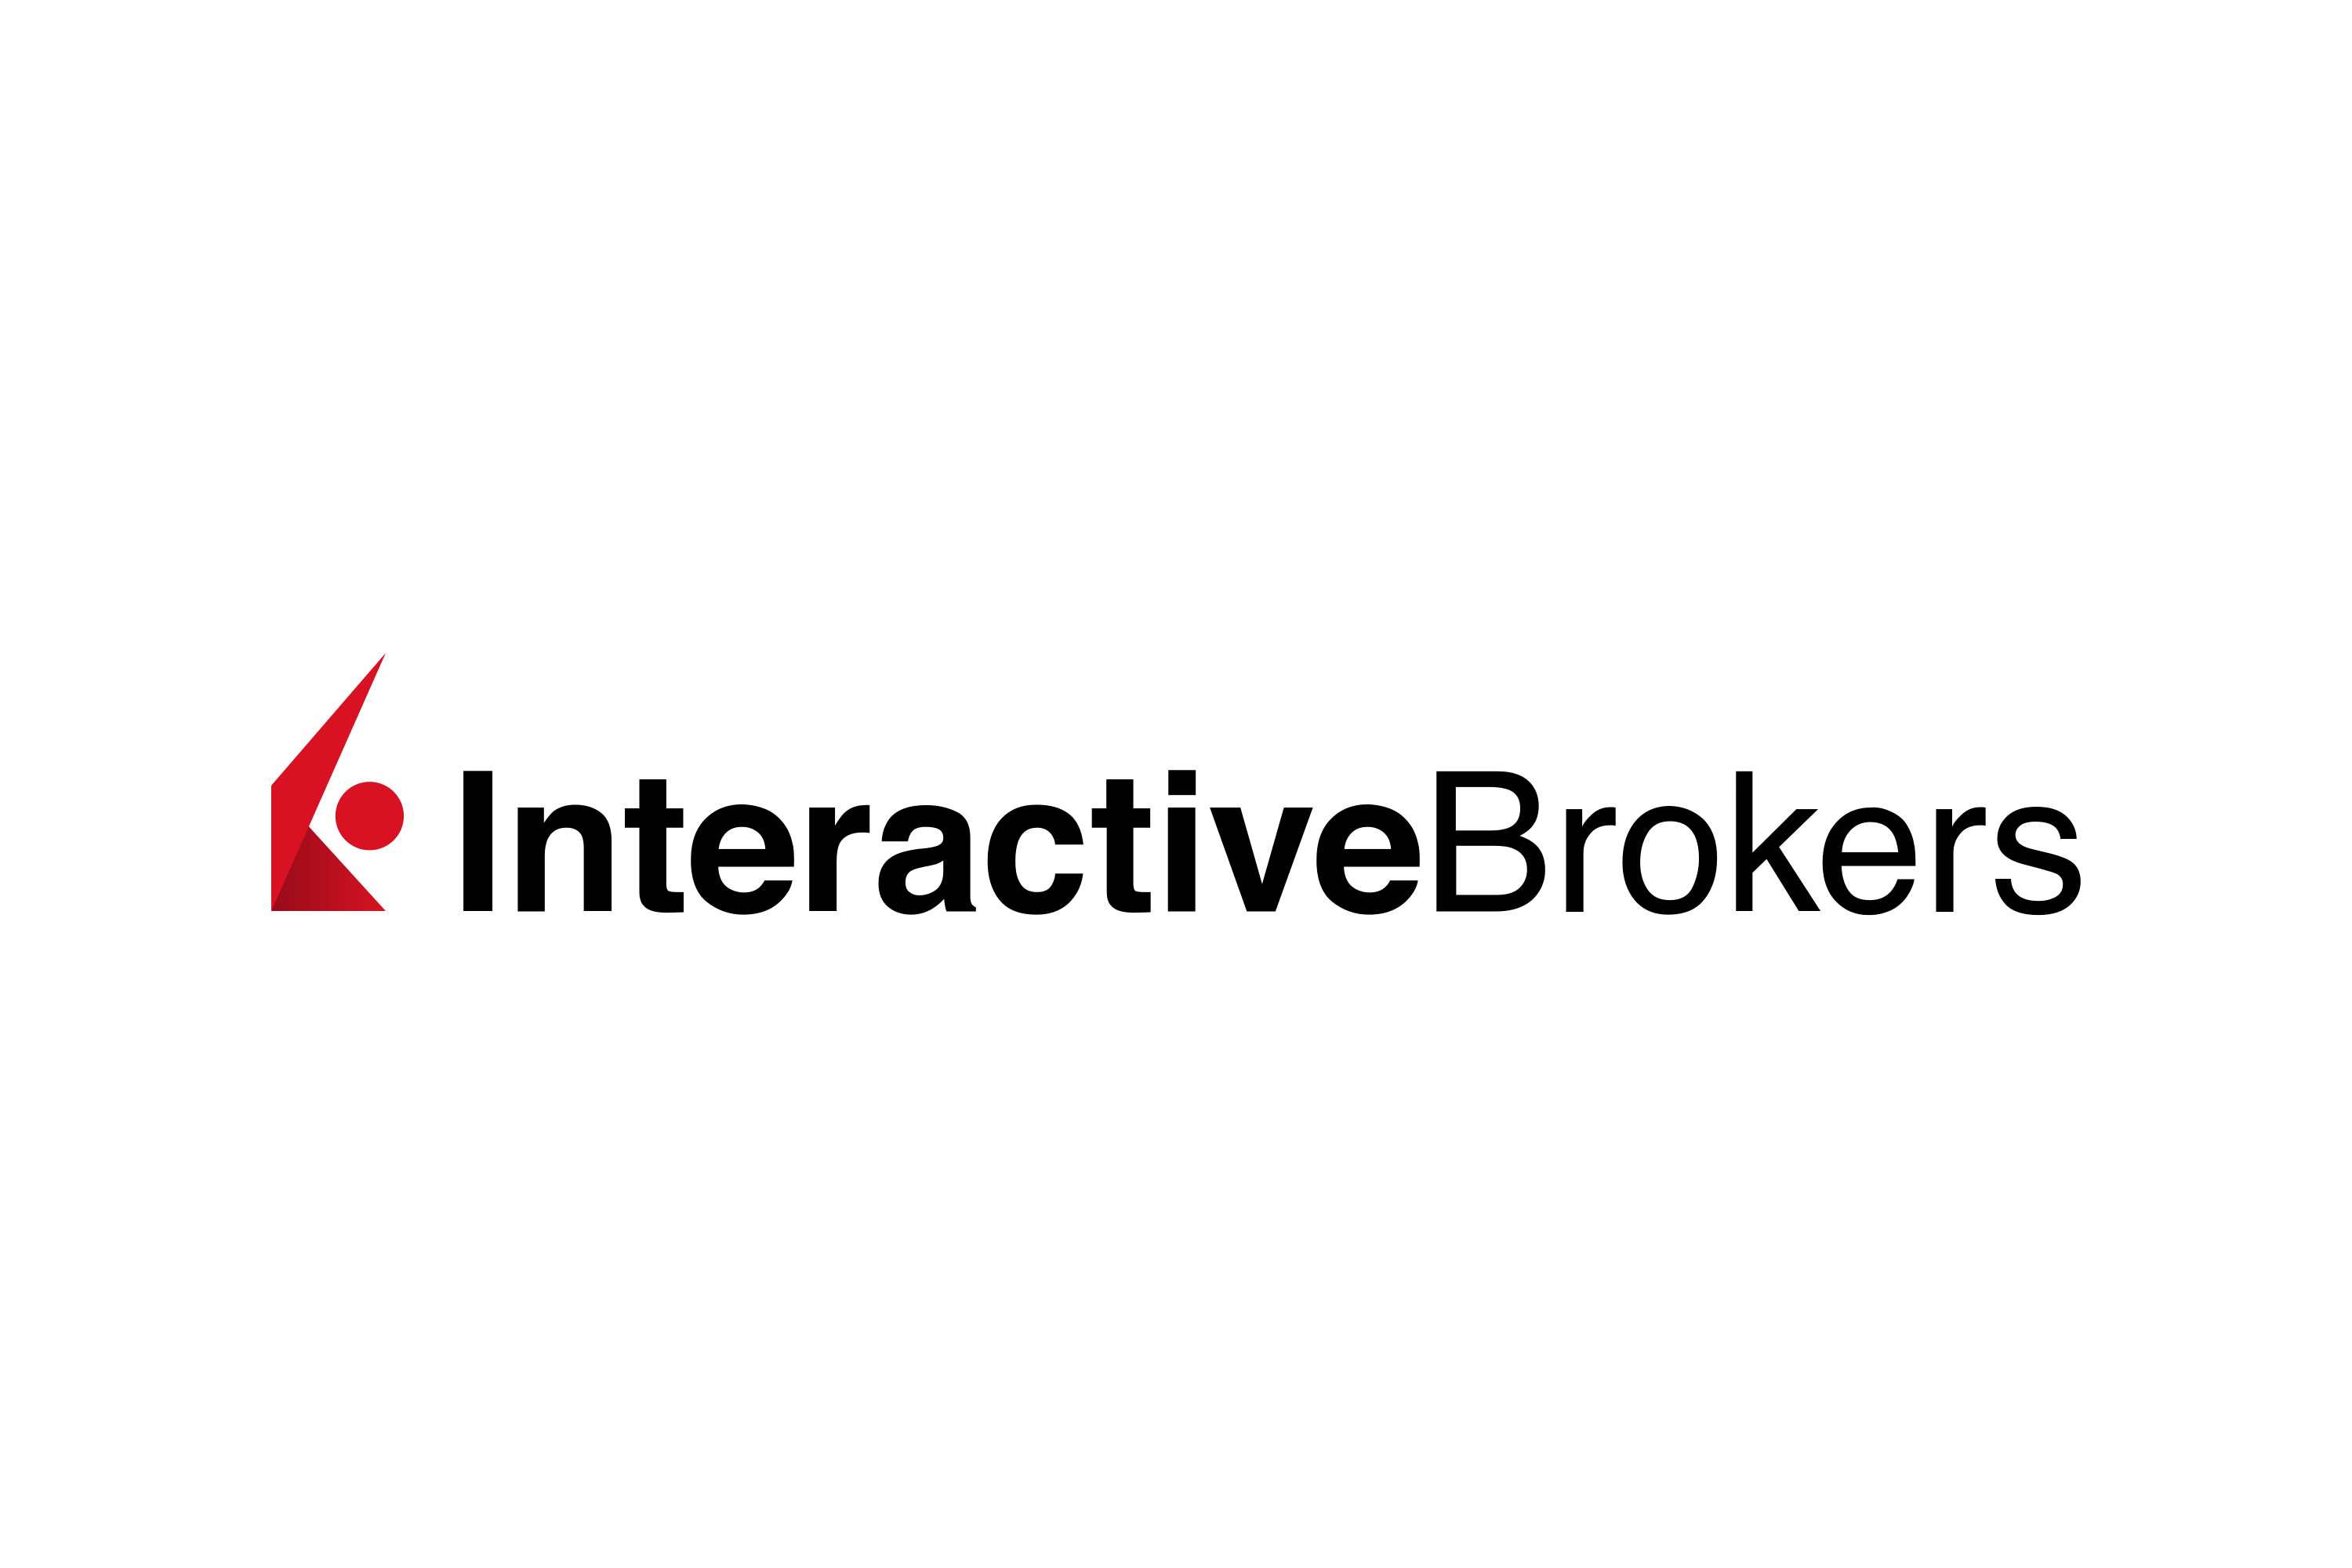 Download Interactive Brokers Logo in SVG Vector or PNG File Format - Logo.wine